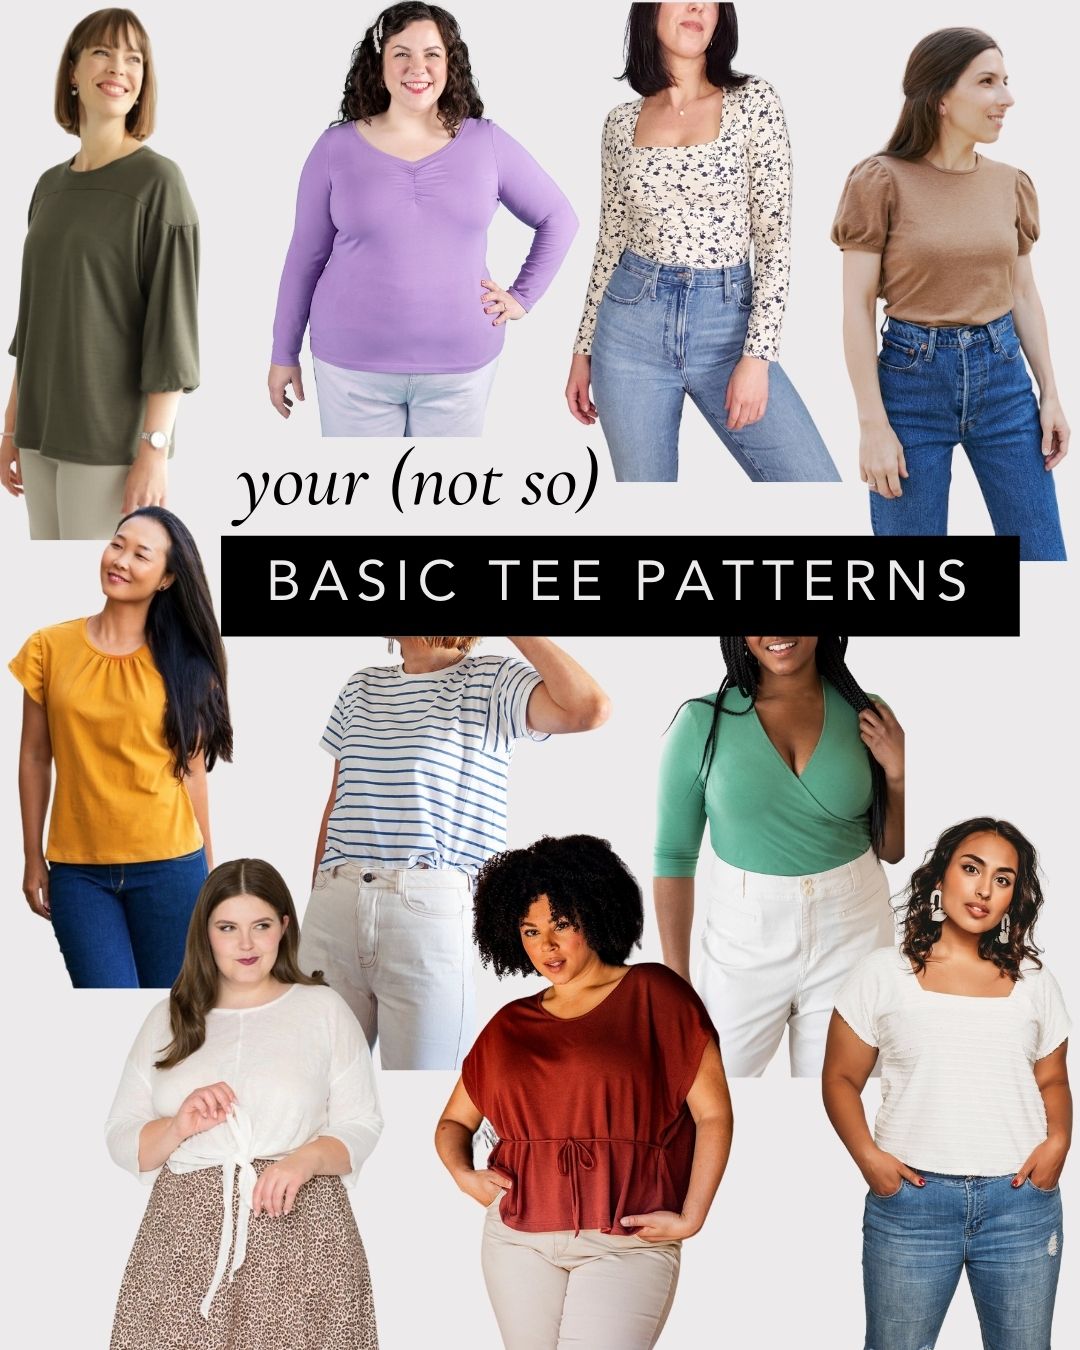 How to tighten an elastic waistband without sewing - B+C Guides